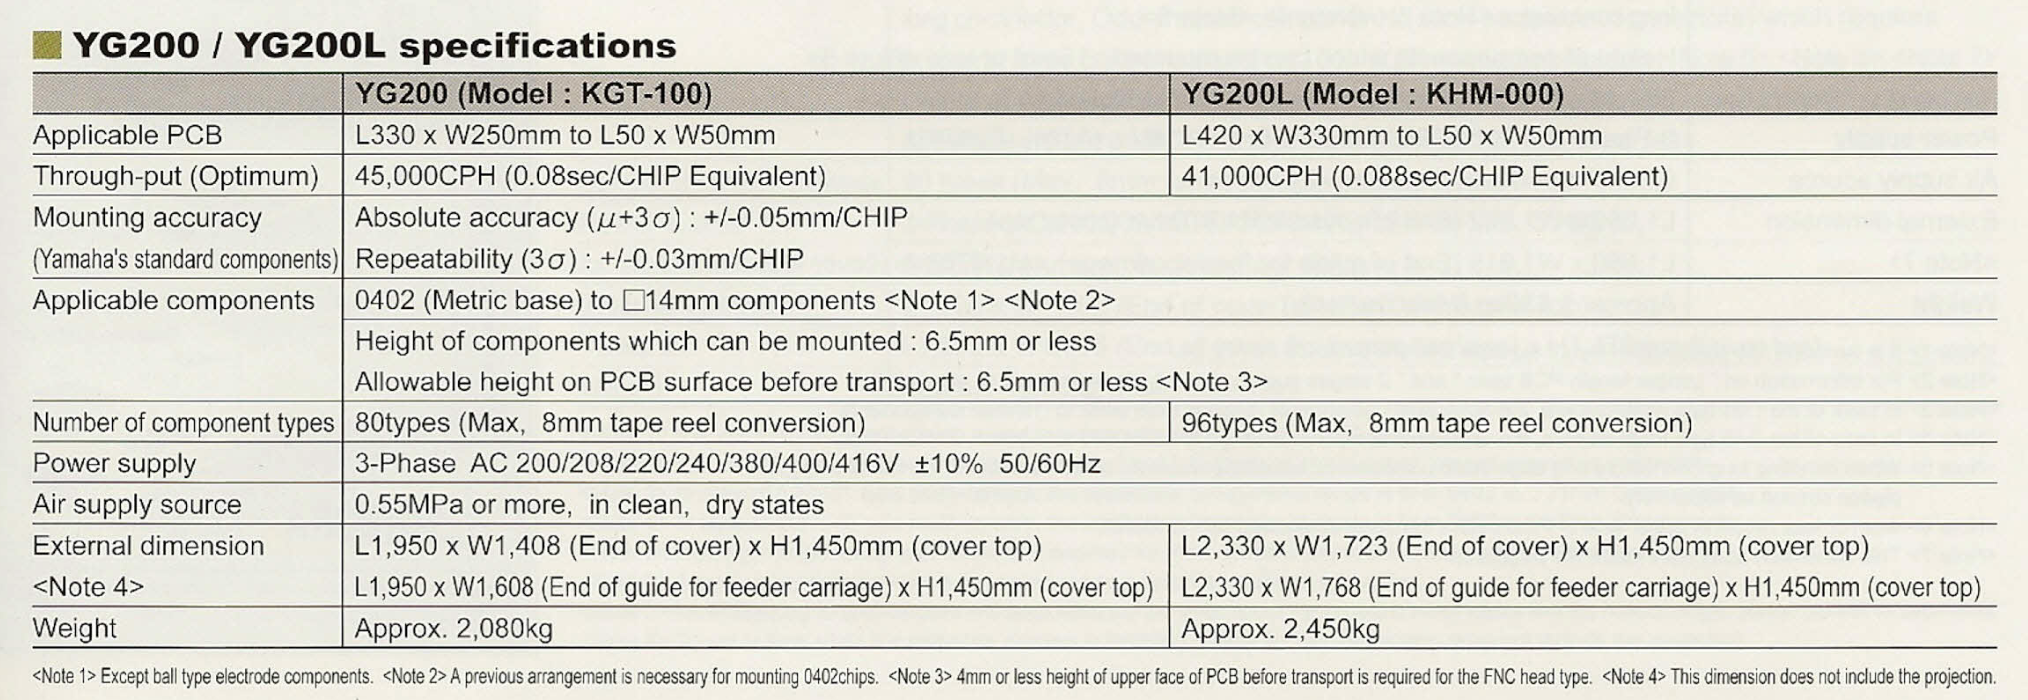 YG200 specifications